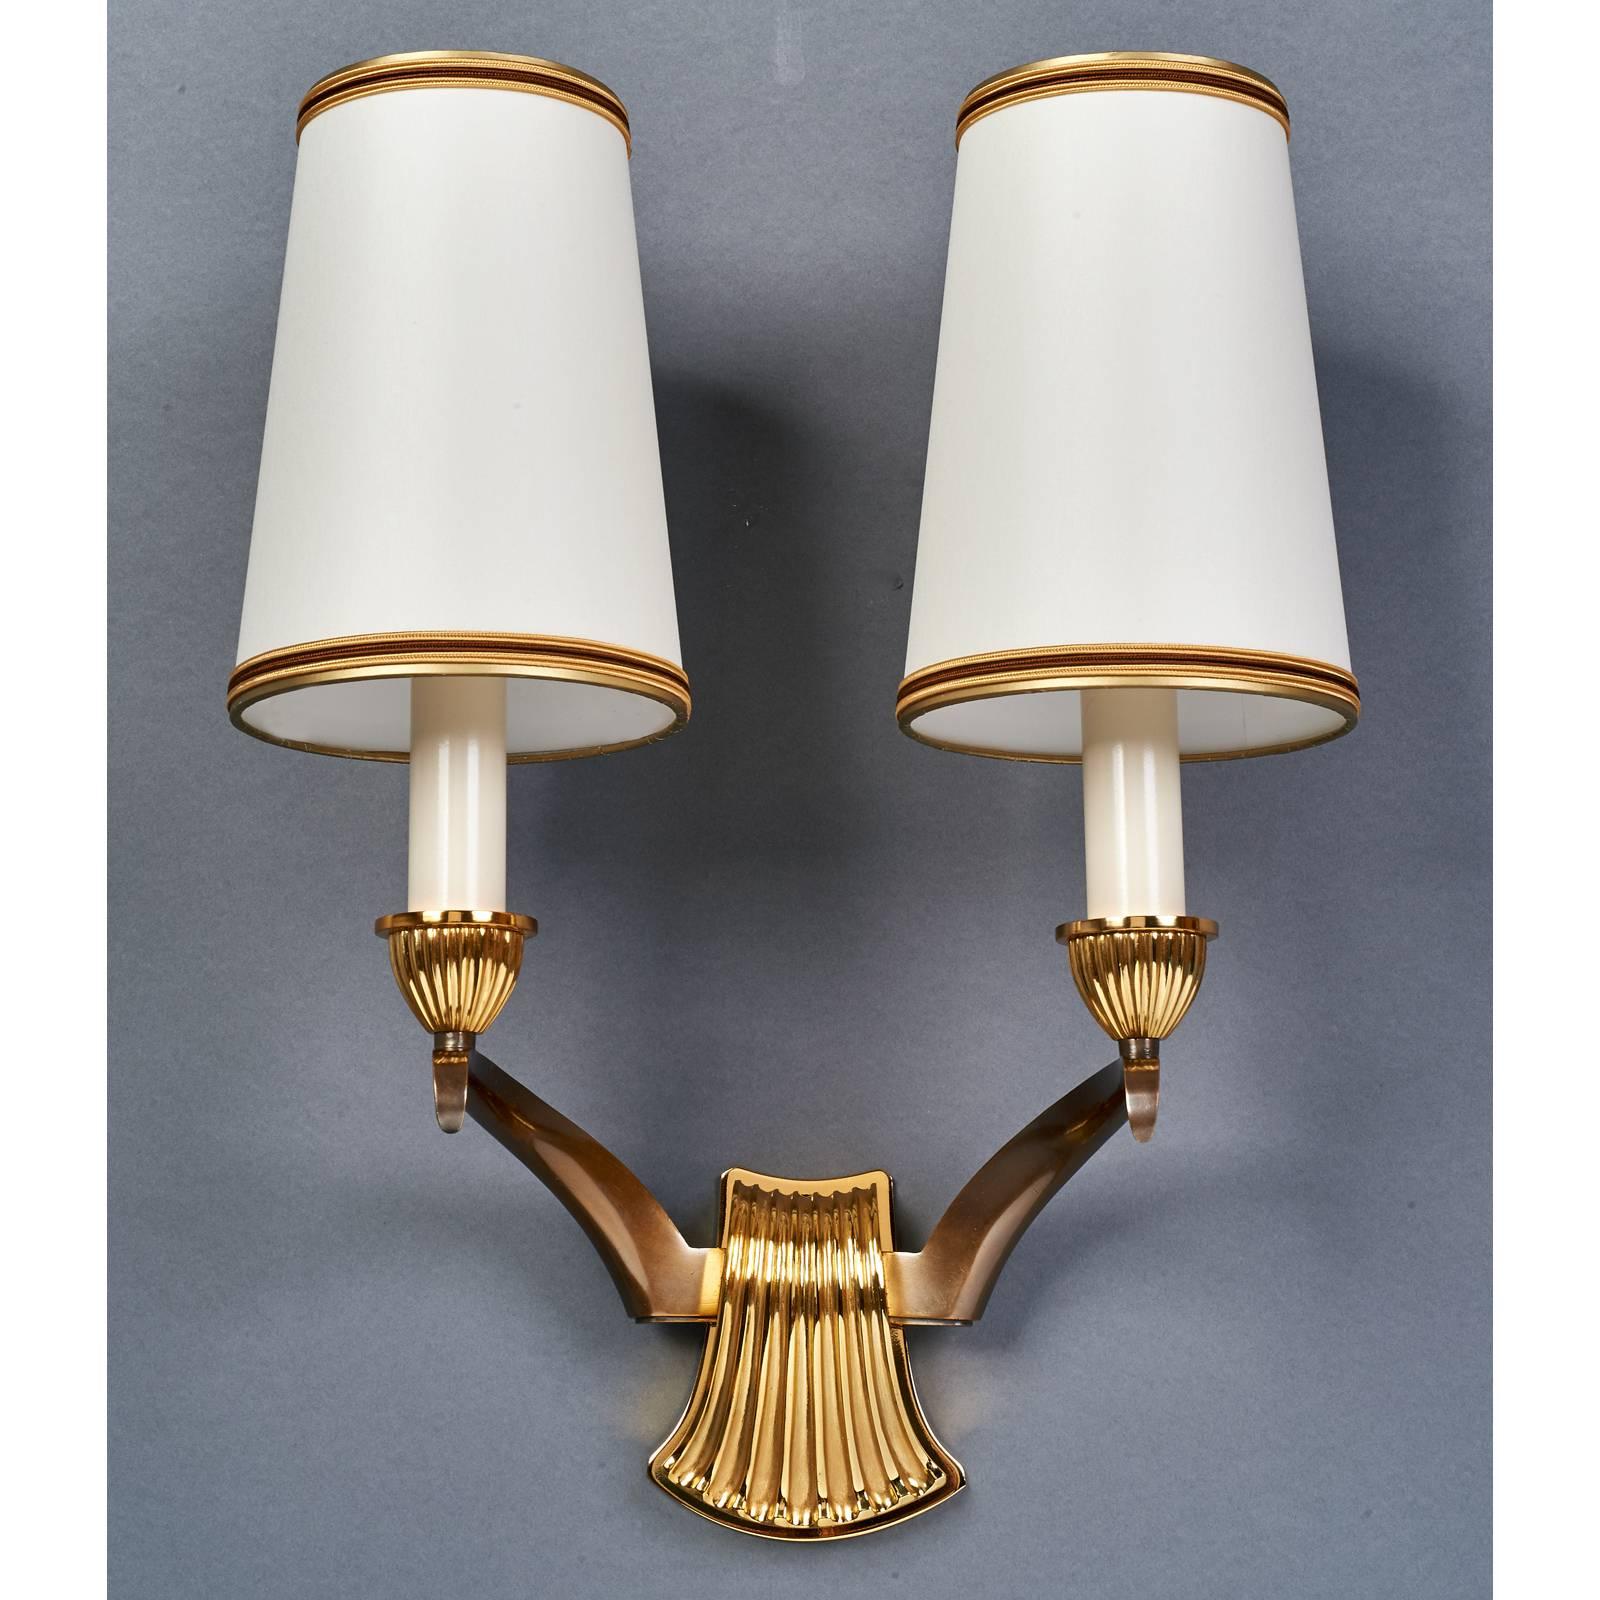 Mid-Century Modern Pair of Scalloped Bronze Sconces by Genet Michon, France 1950s